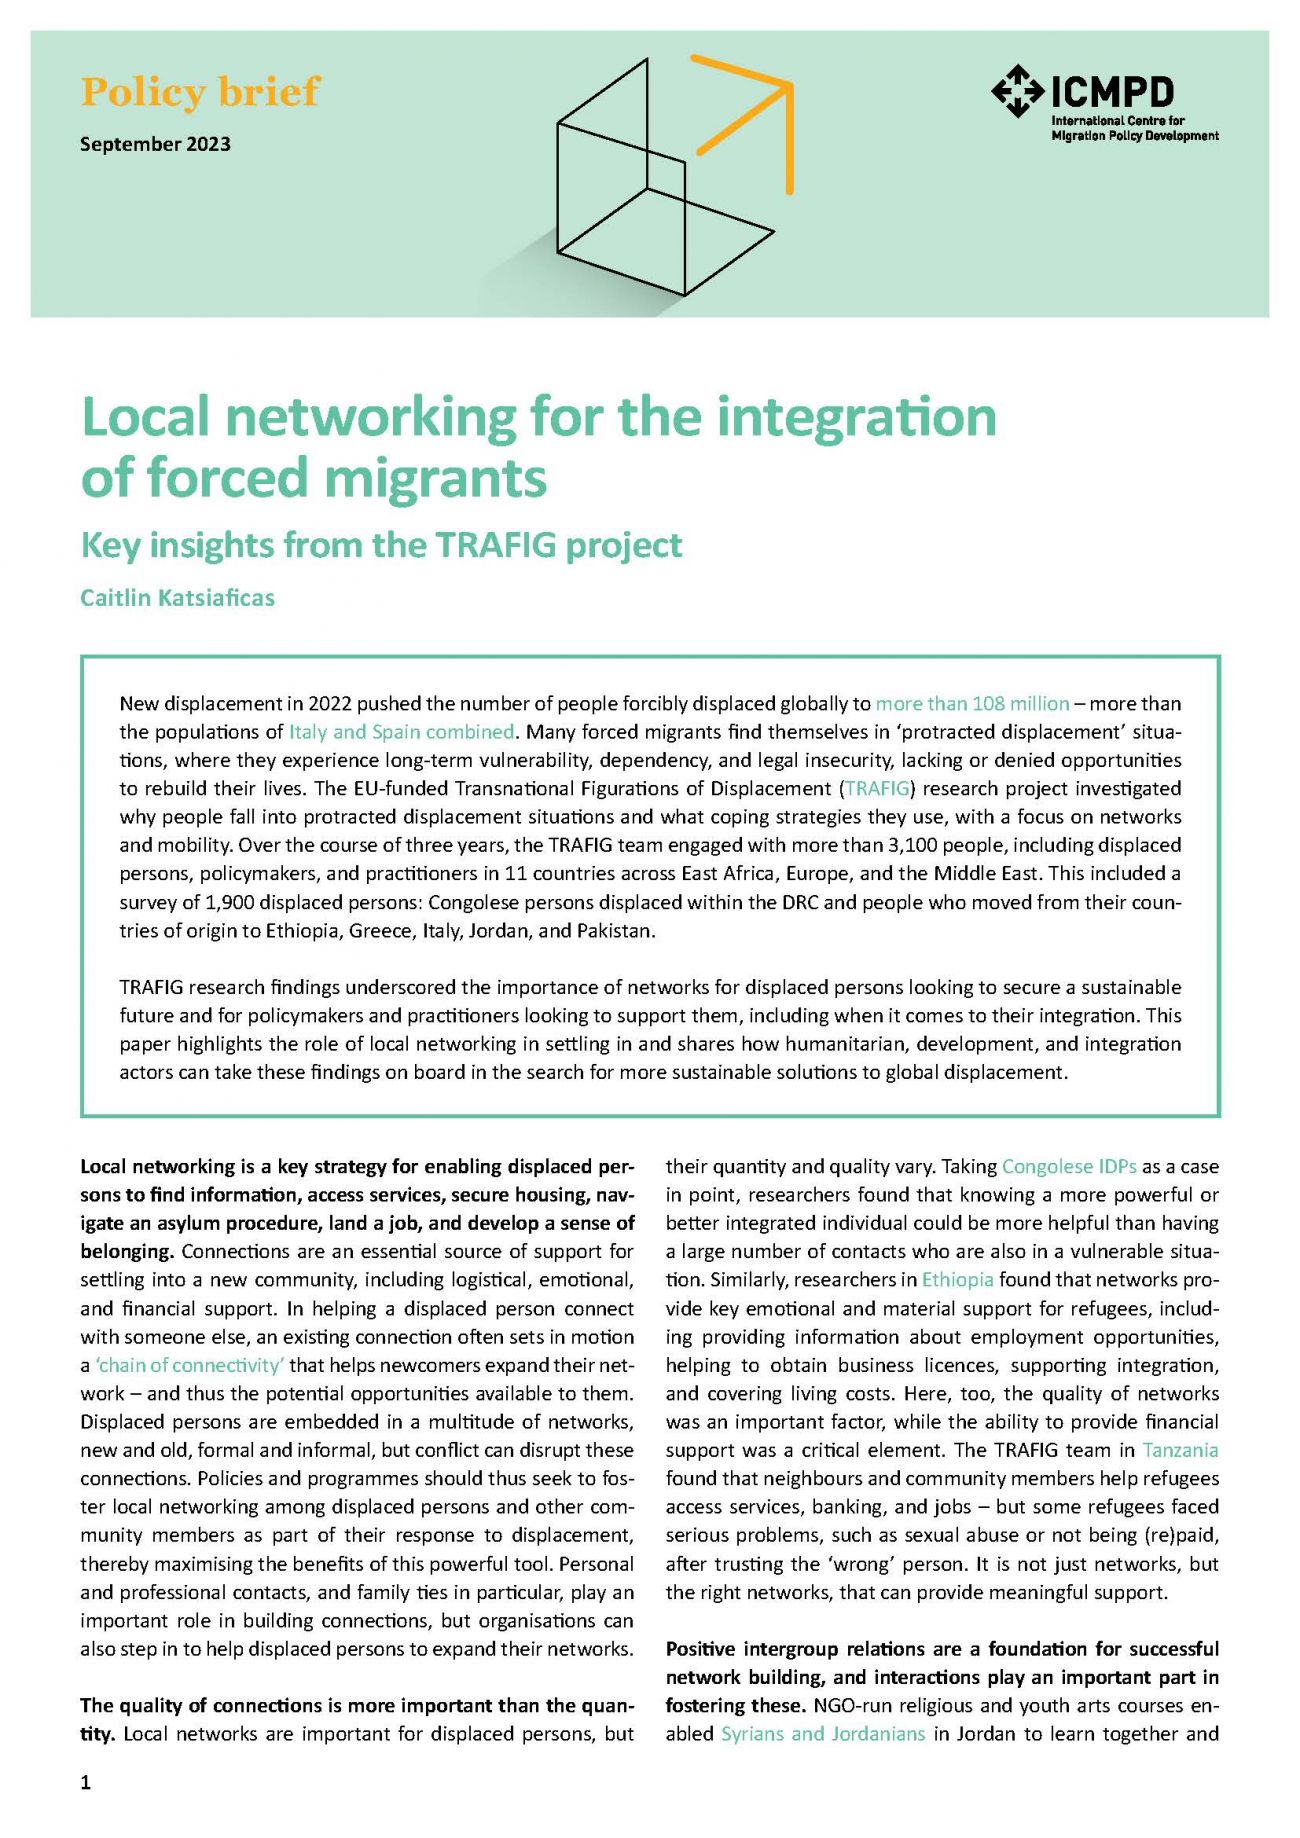 Local networking for the integration of forced migrants Policy Brief_Page_1.jpg